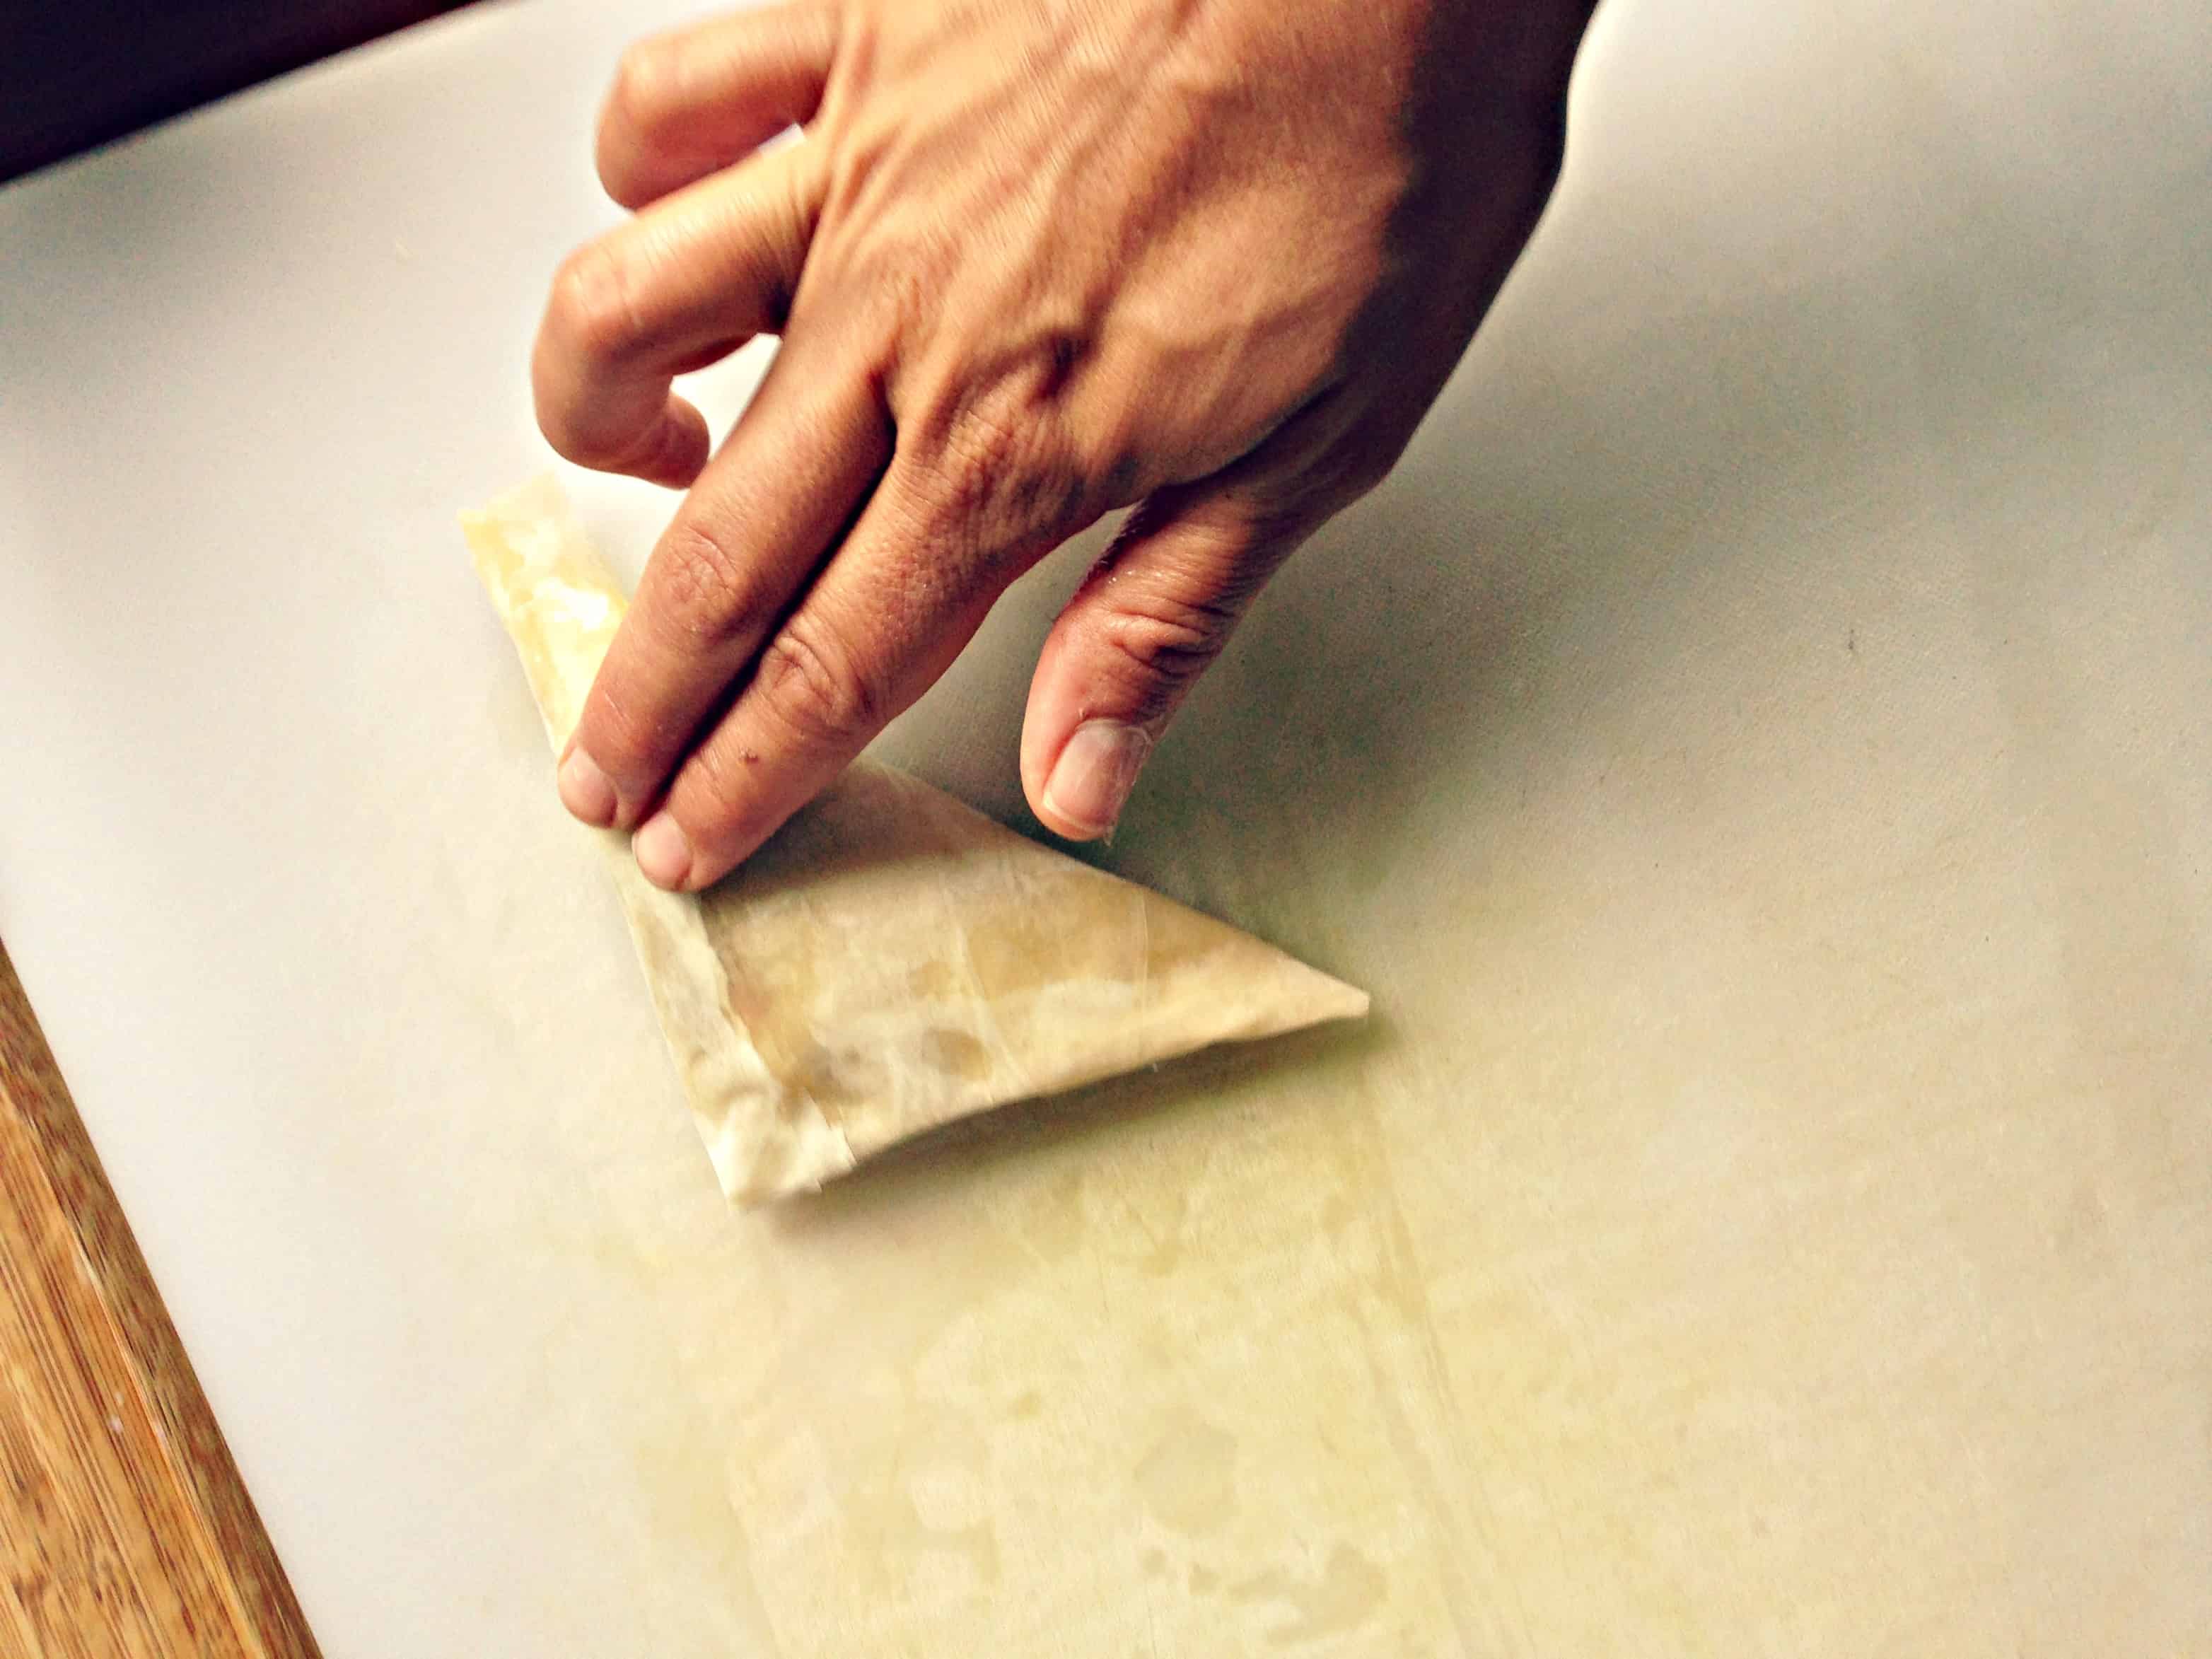 Sealing the edges of puff pastry with fingertips.